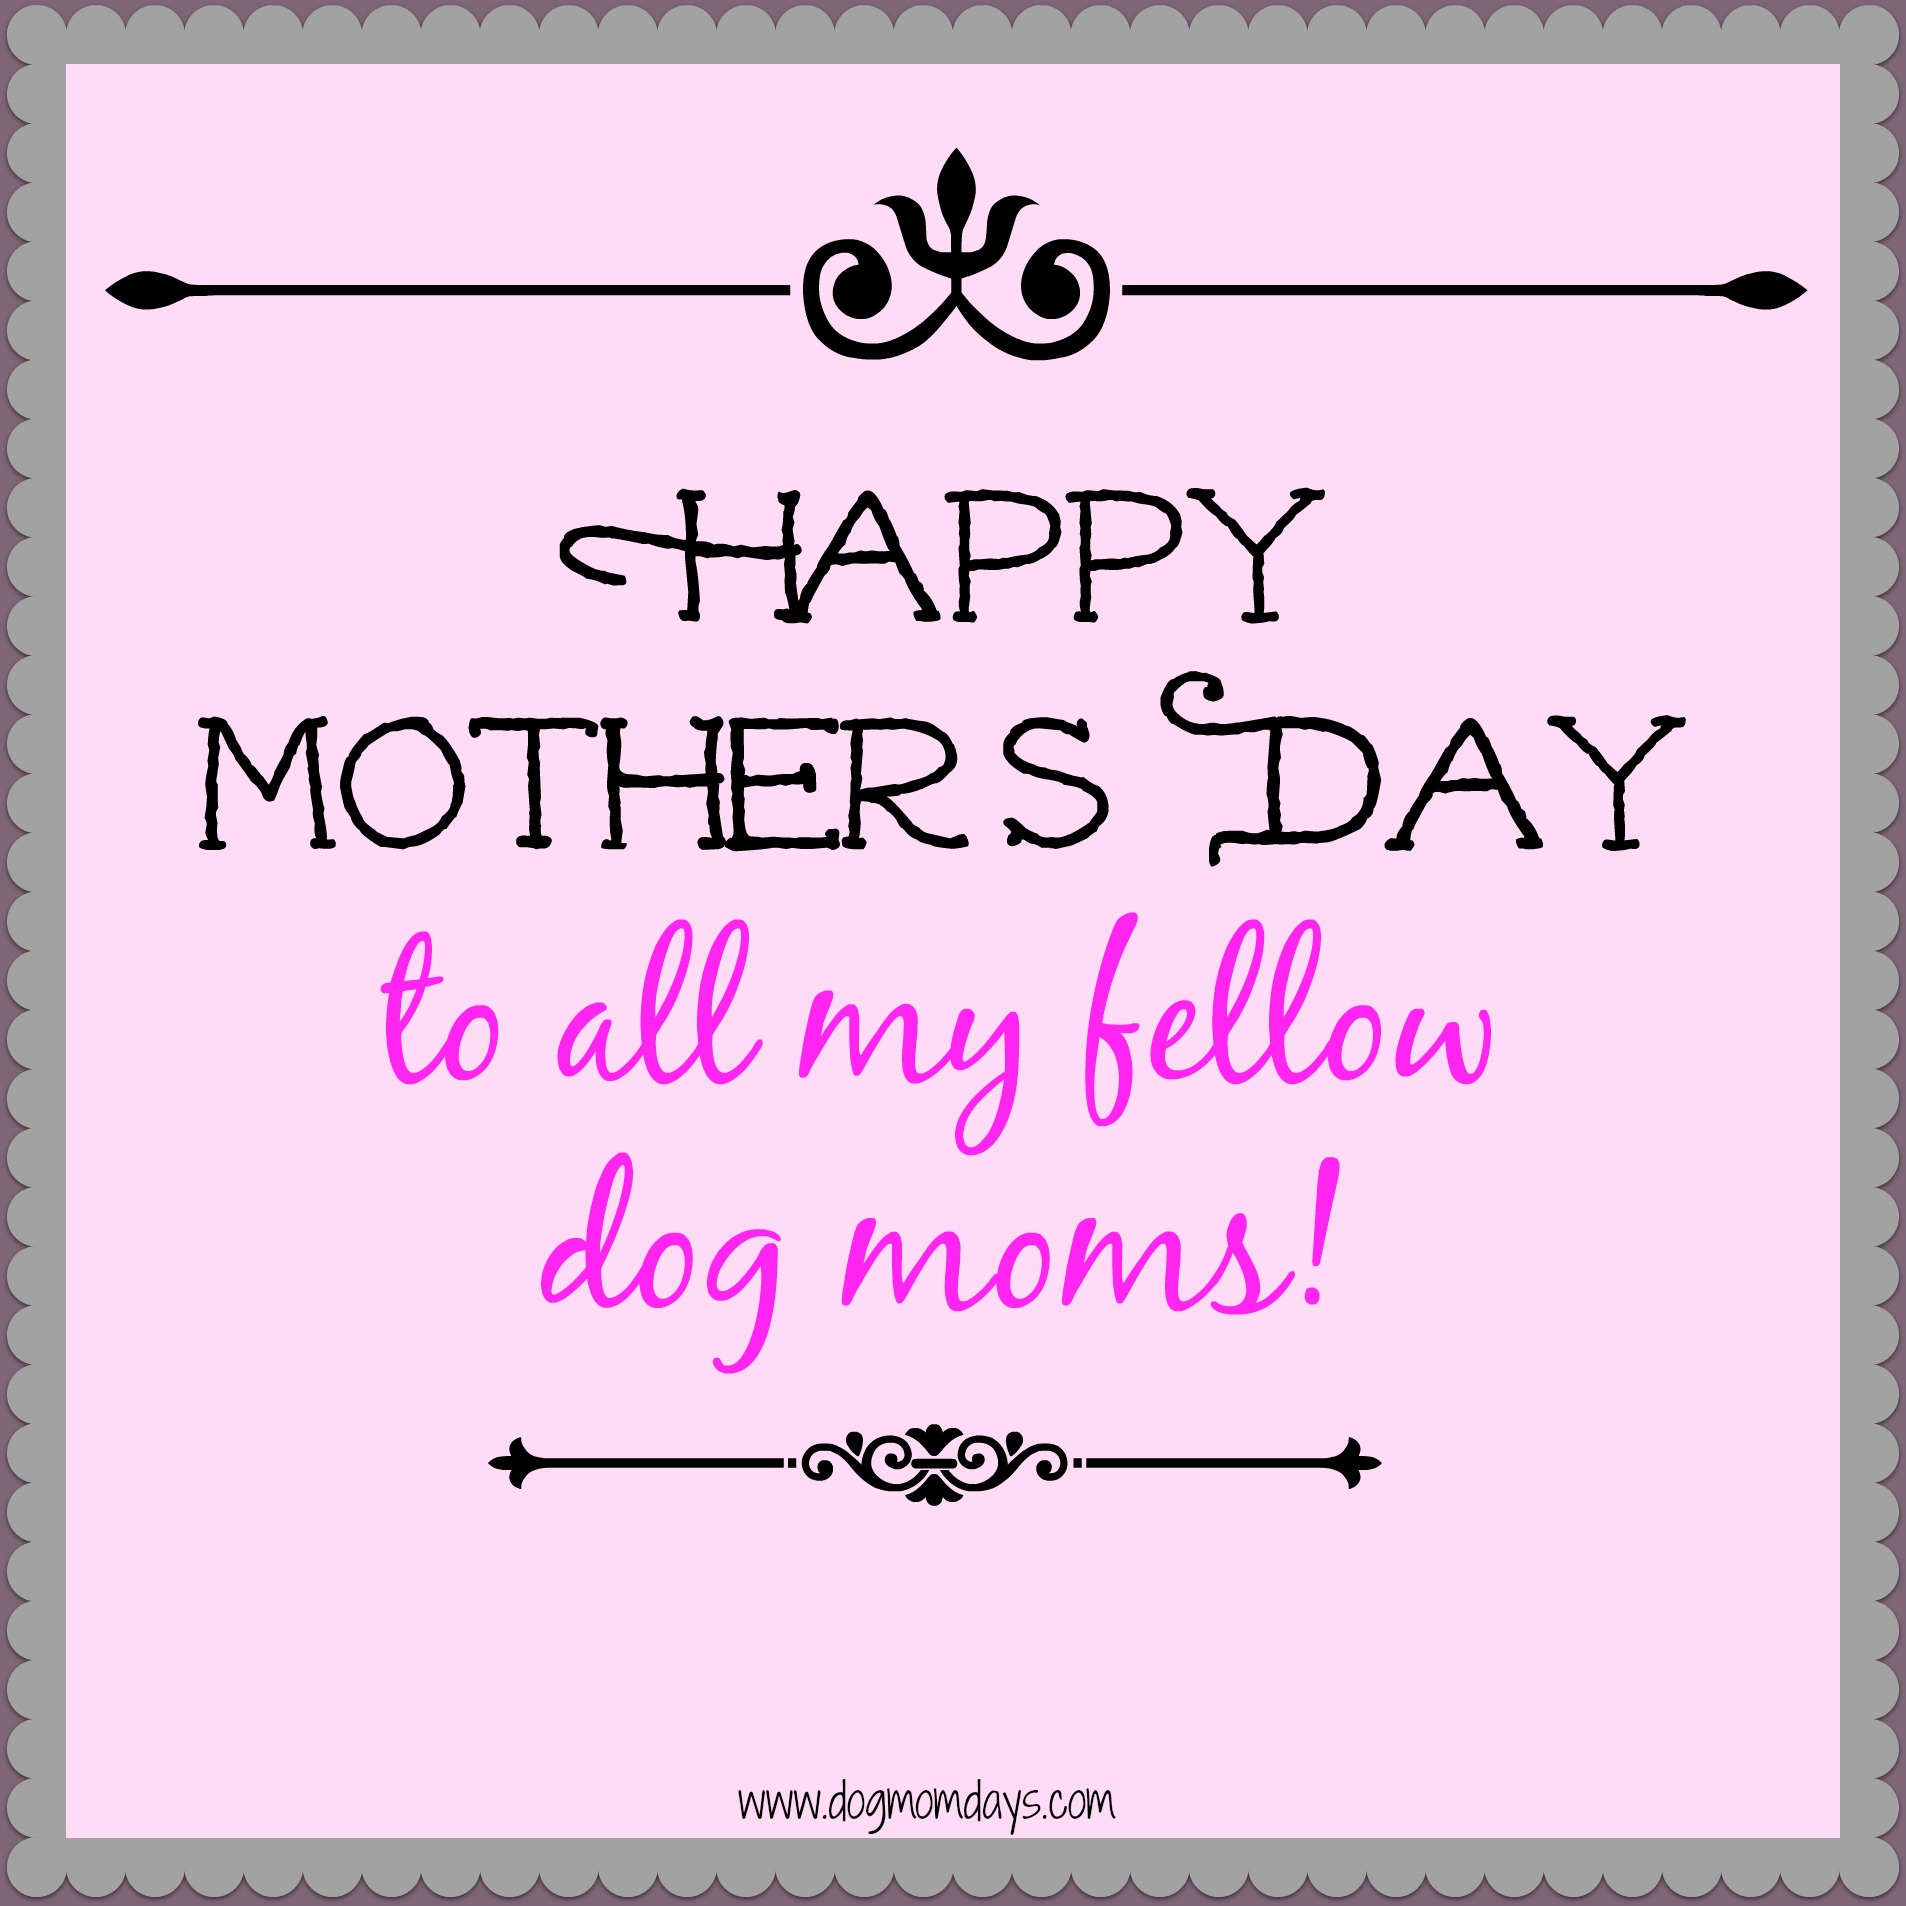 Dog Mom Gifts for Mother's Day - Dog Mom Days